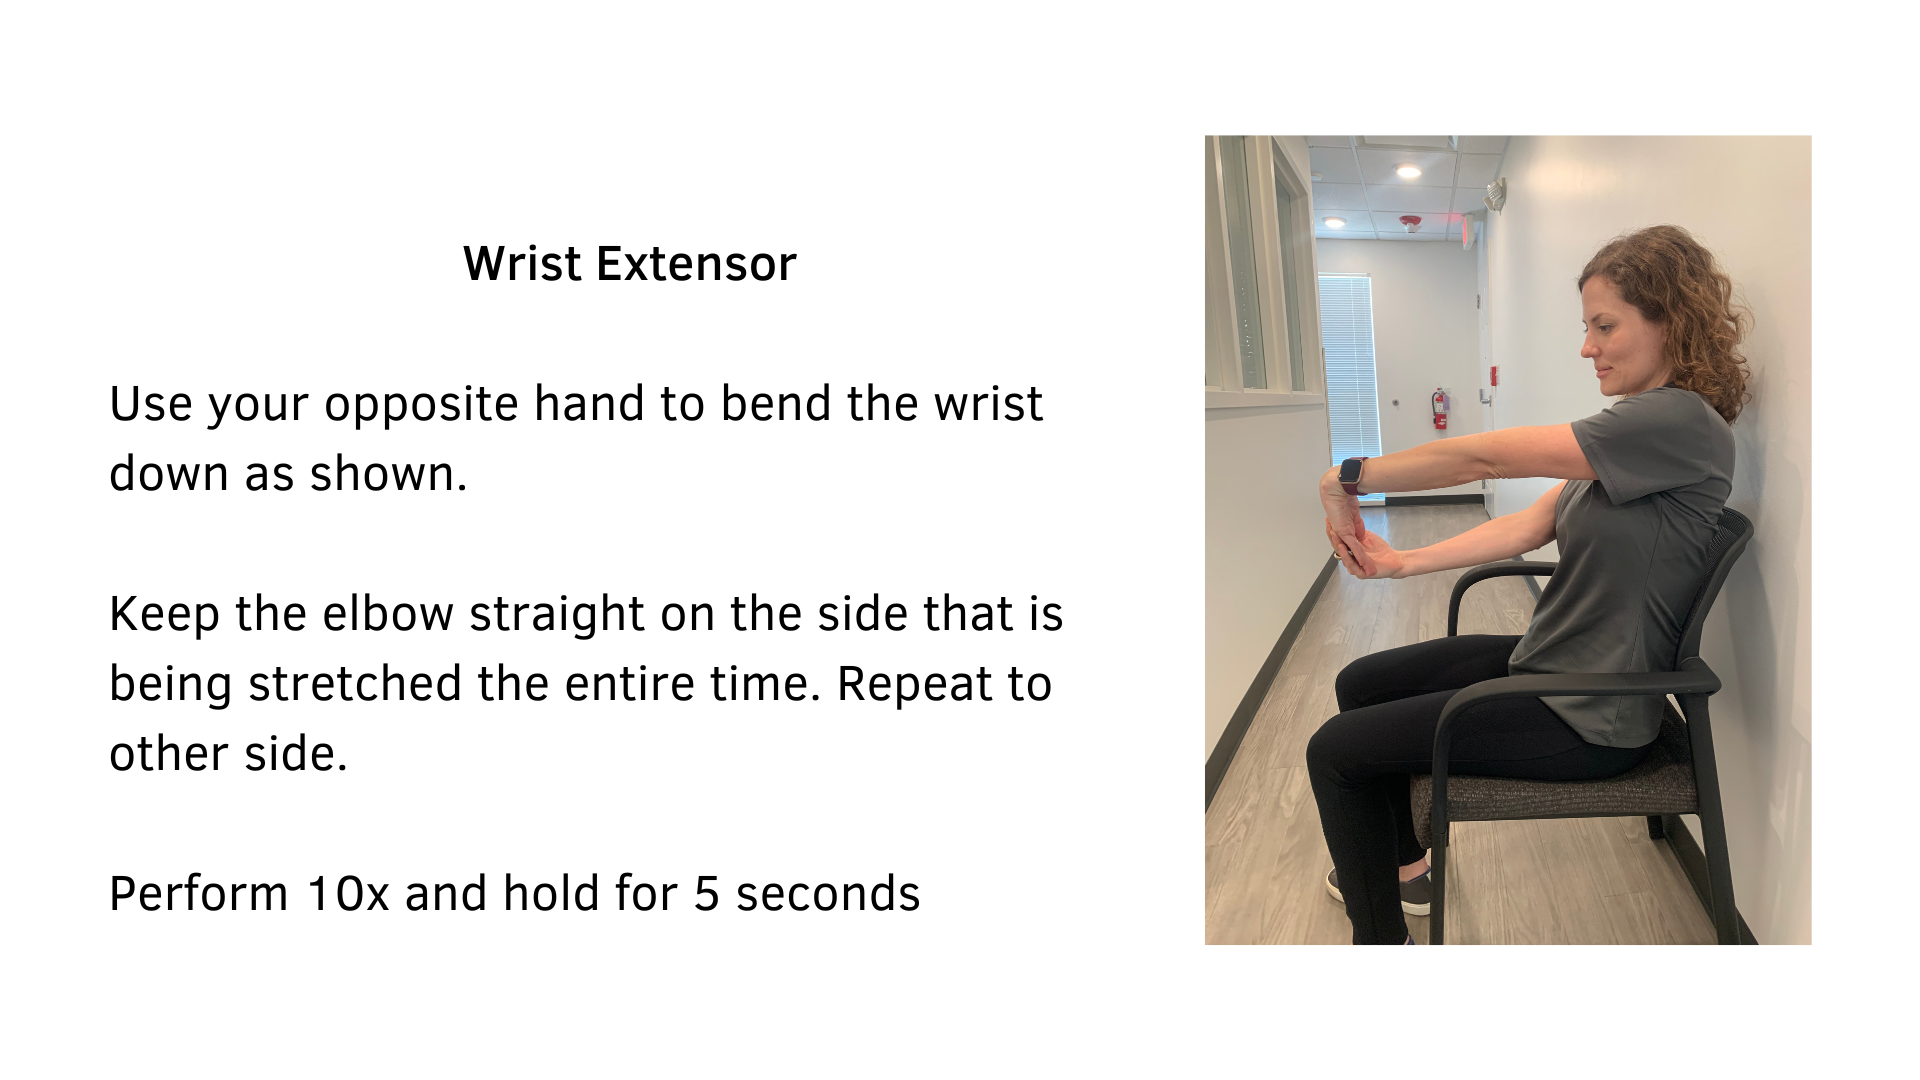 Black text on a white background that reads, "Wrist Extensor: Use your opposite hand to bend the wrist down as shown. Keep the elbow straight on the side that is being stretched the entire time. Repeat to the other side. Perform 10x and hold for 5 seconds". A picture of a woman sitting in a chair performing the stretch is featured.